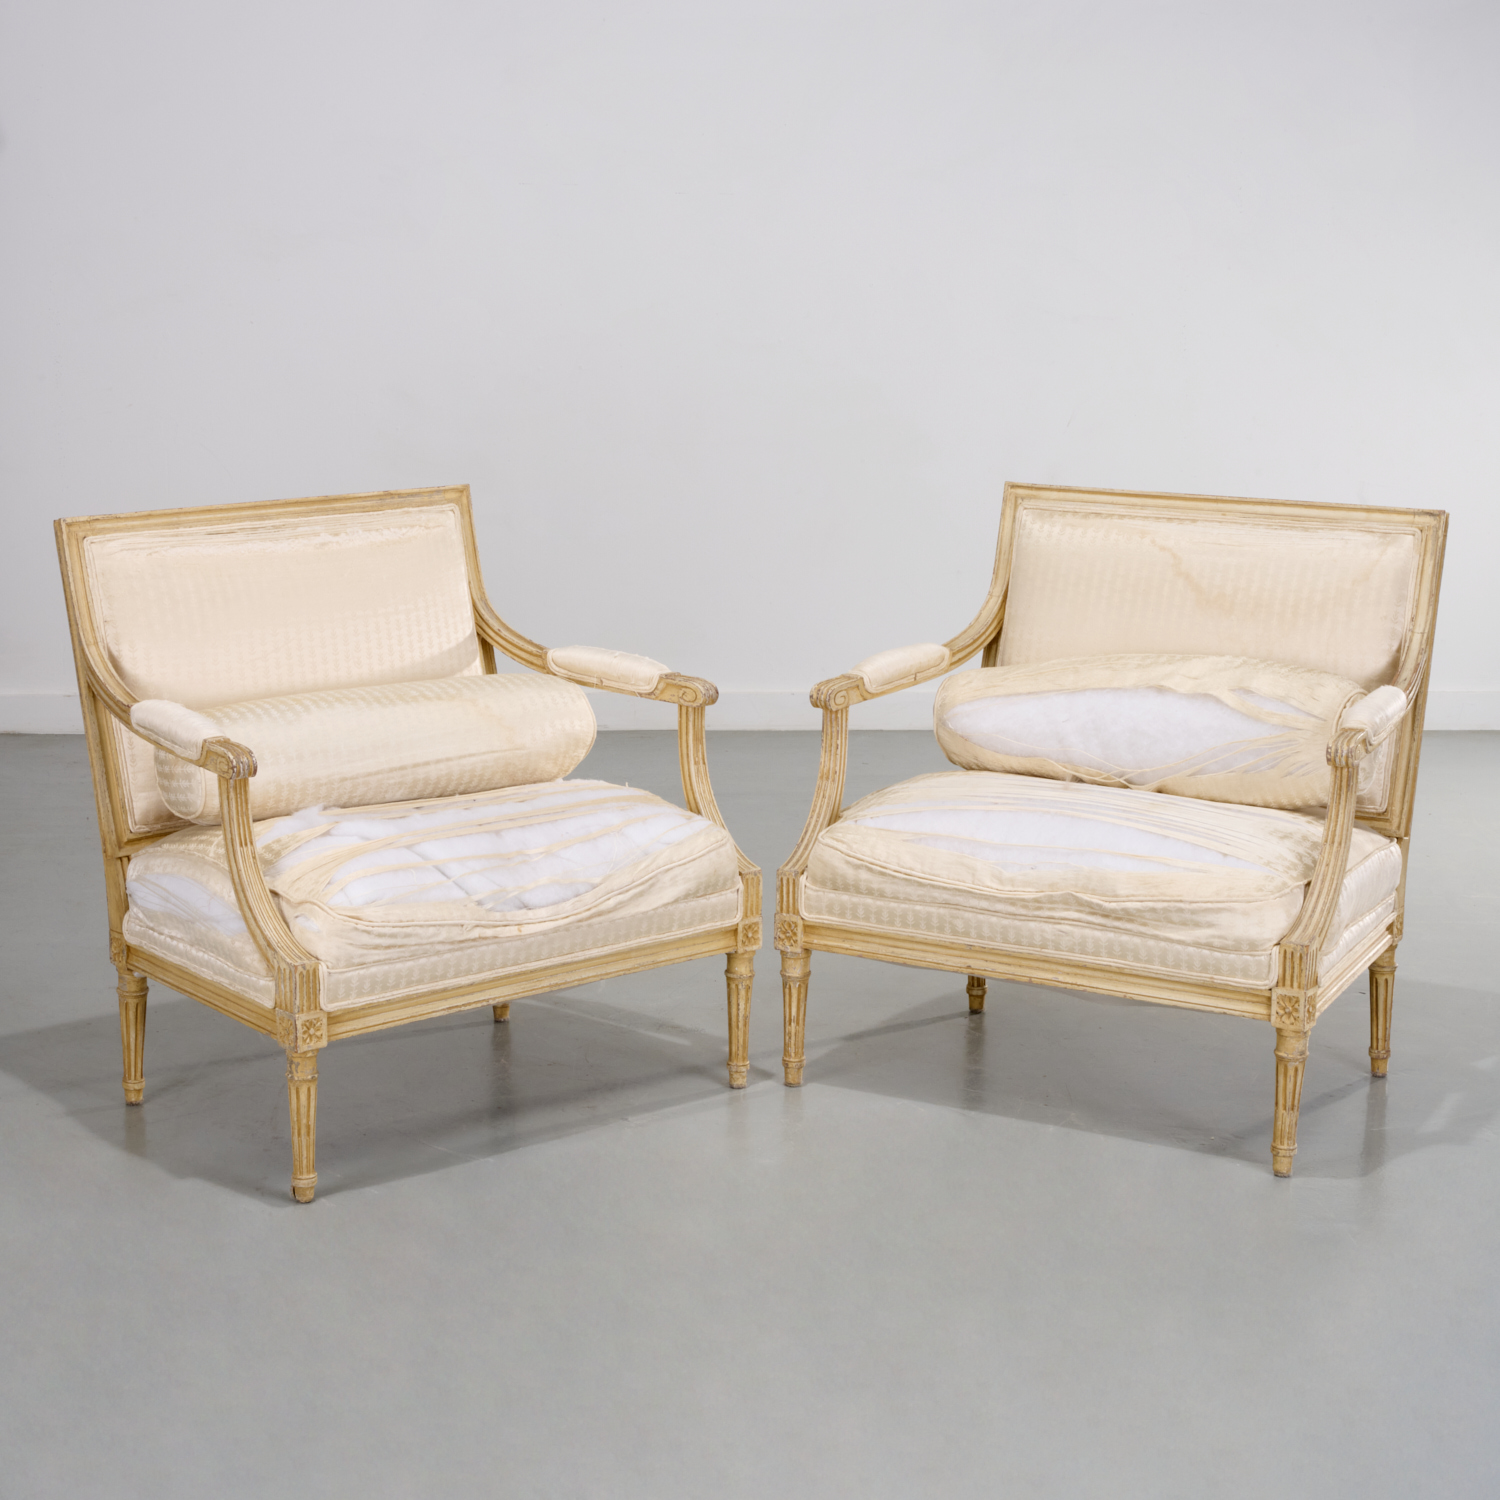 PAIR LOUIS XVI STYLE PAINTED MARQUISE 3604dd